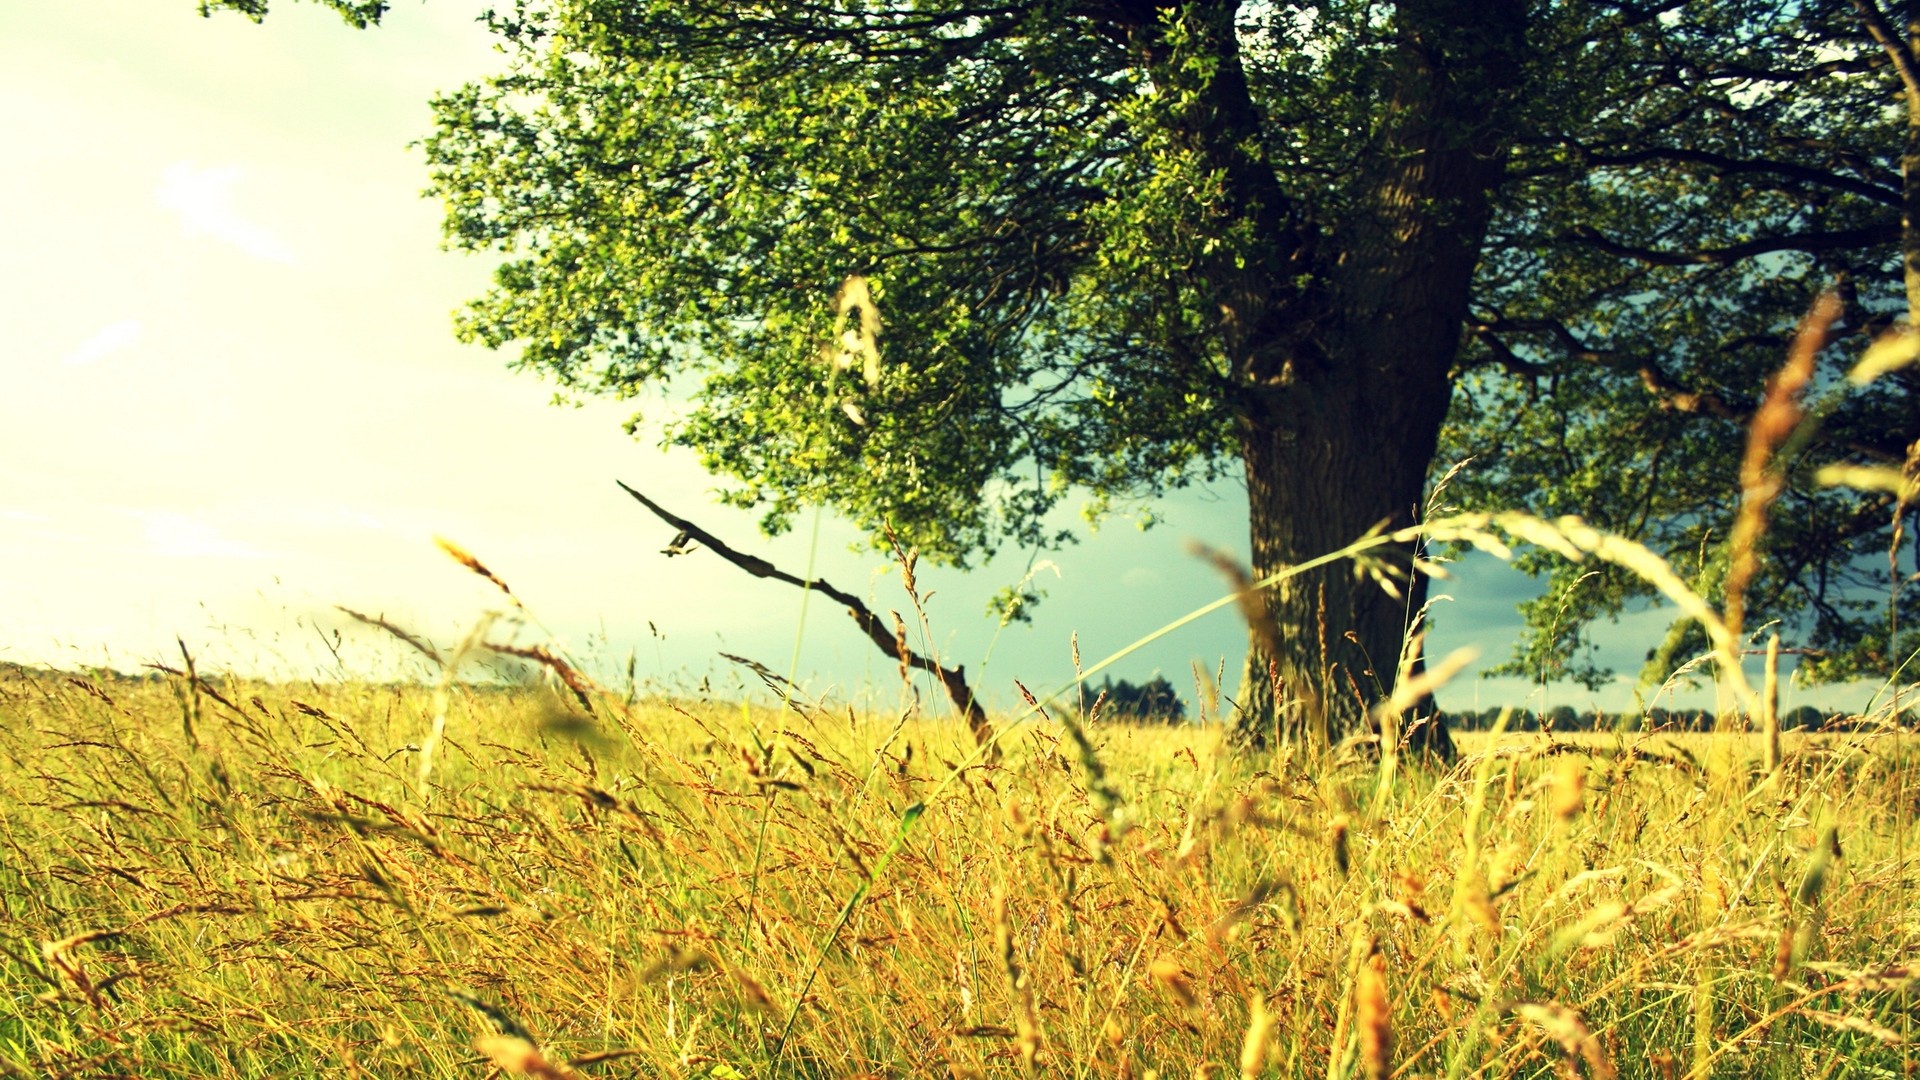 1920x1080 wallpapers: tree, field, grass, rye, summer, paints, colors (image)